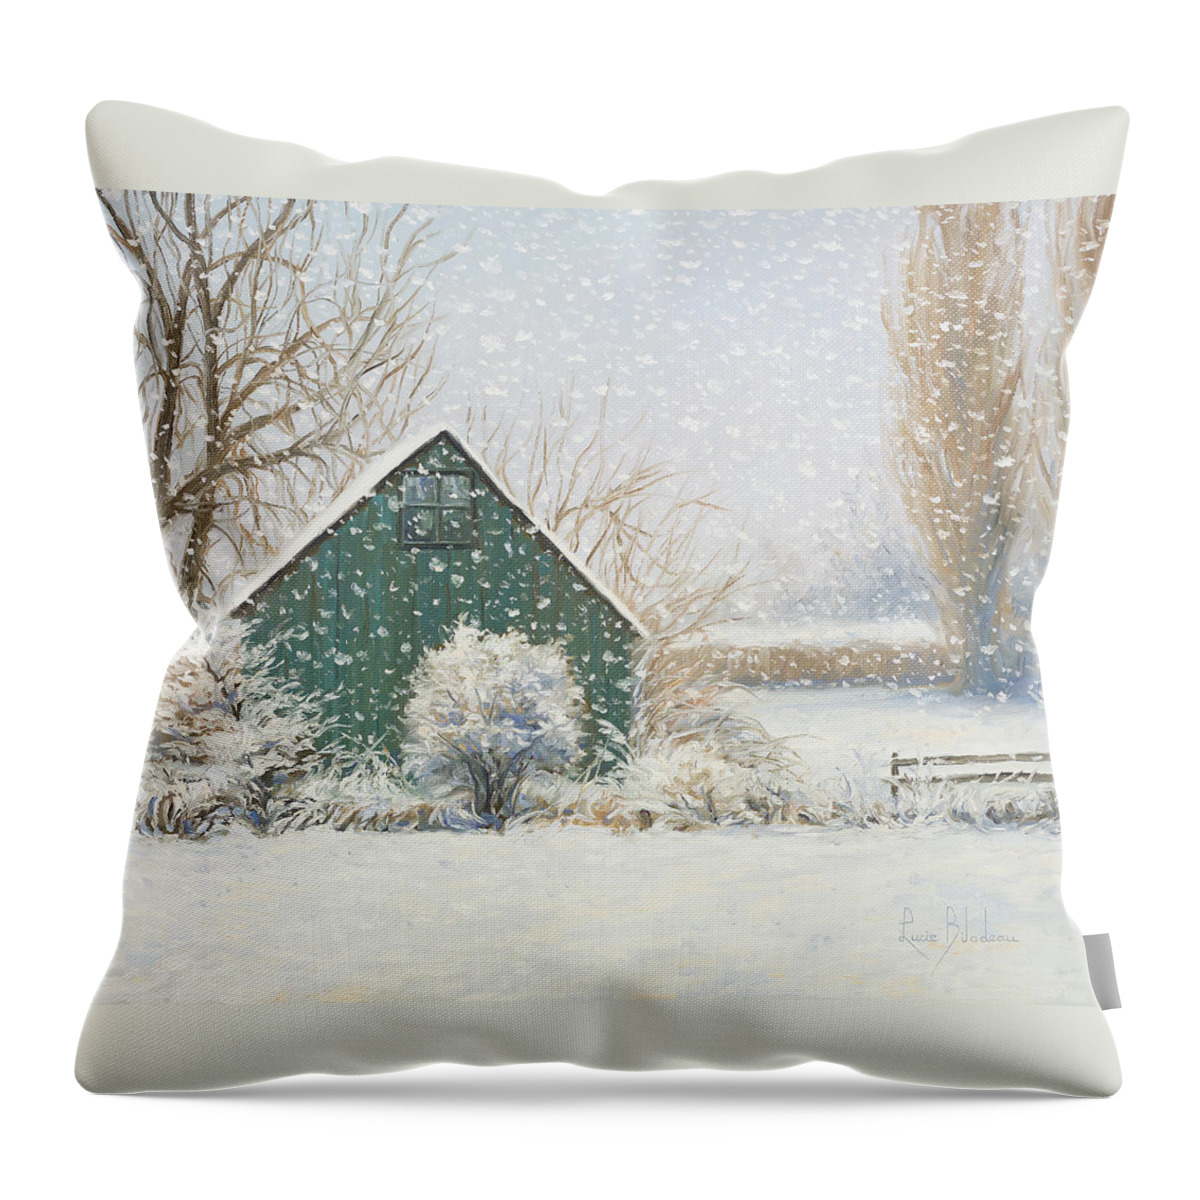 Barn Throw Pillow featuring the painting Winter Magic by Lucie Bilodeau